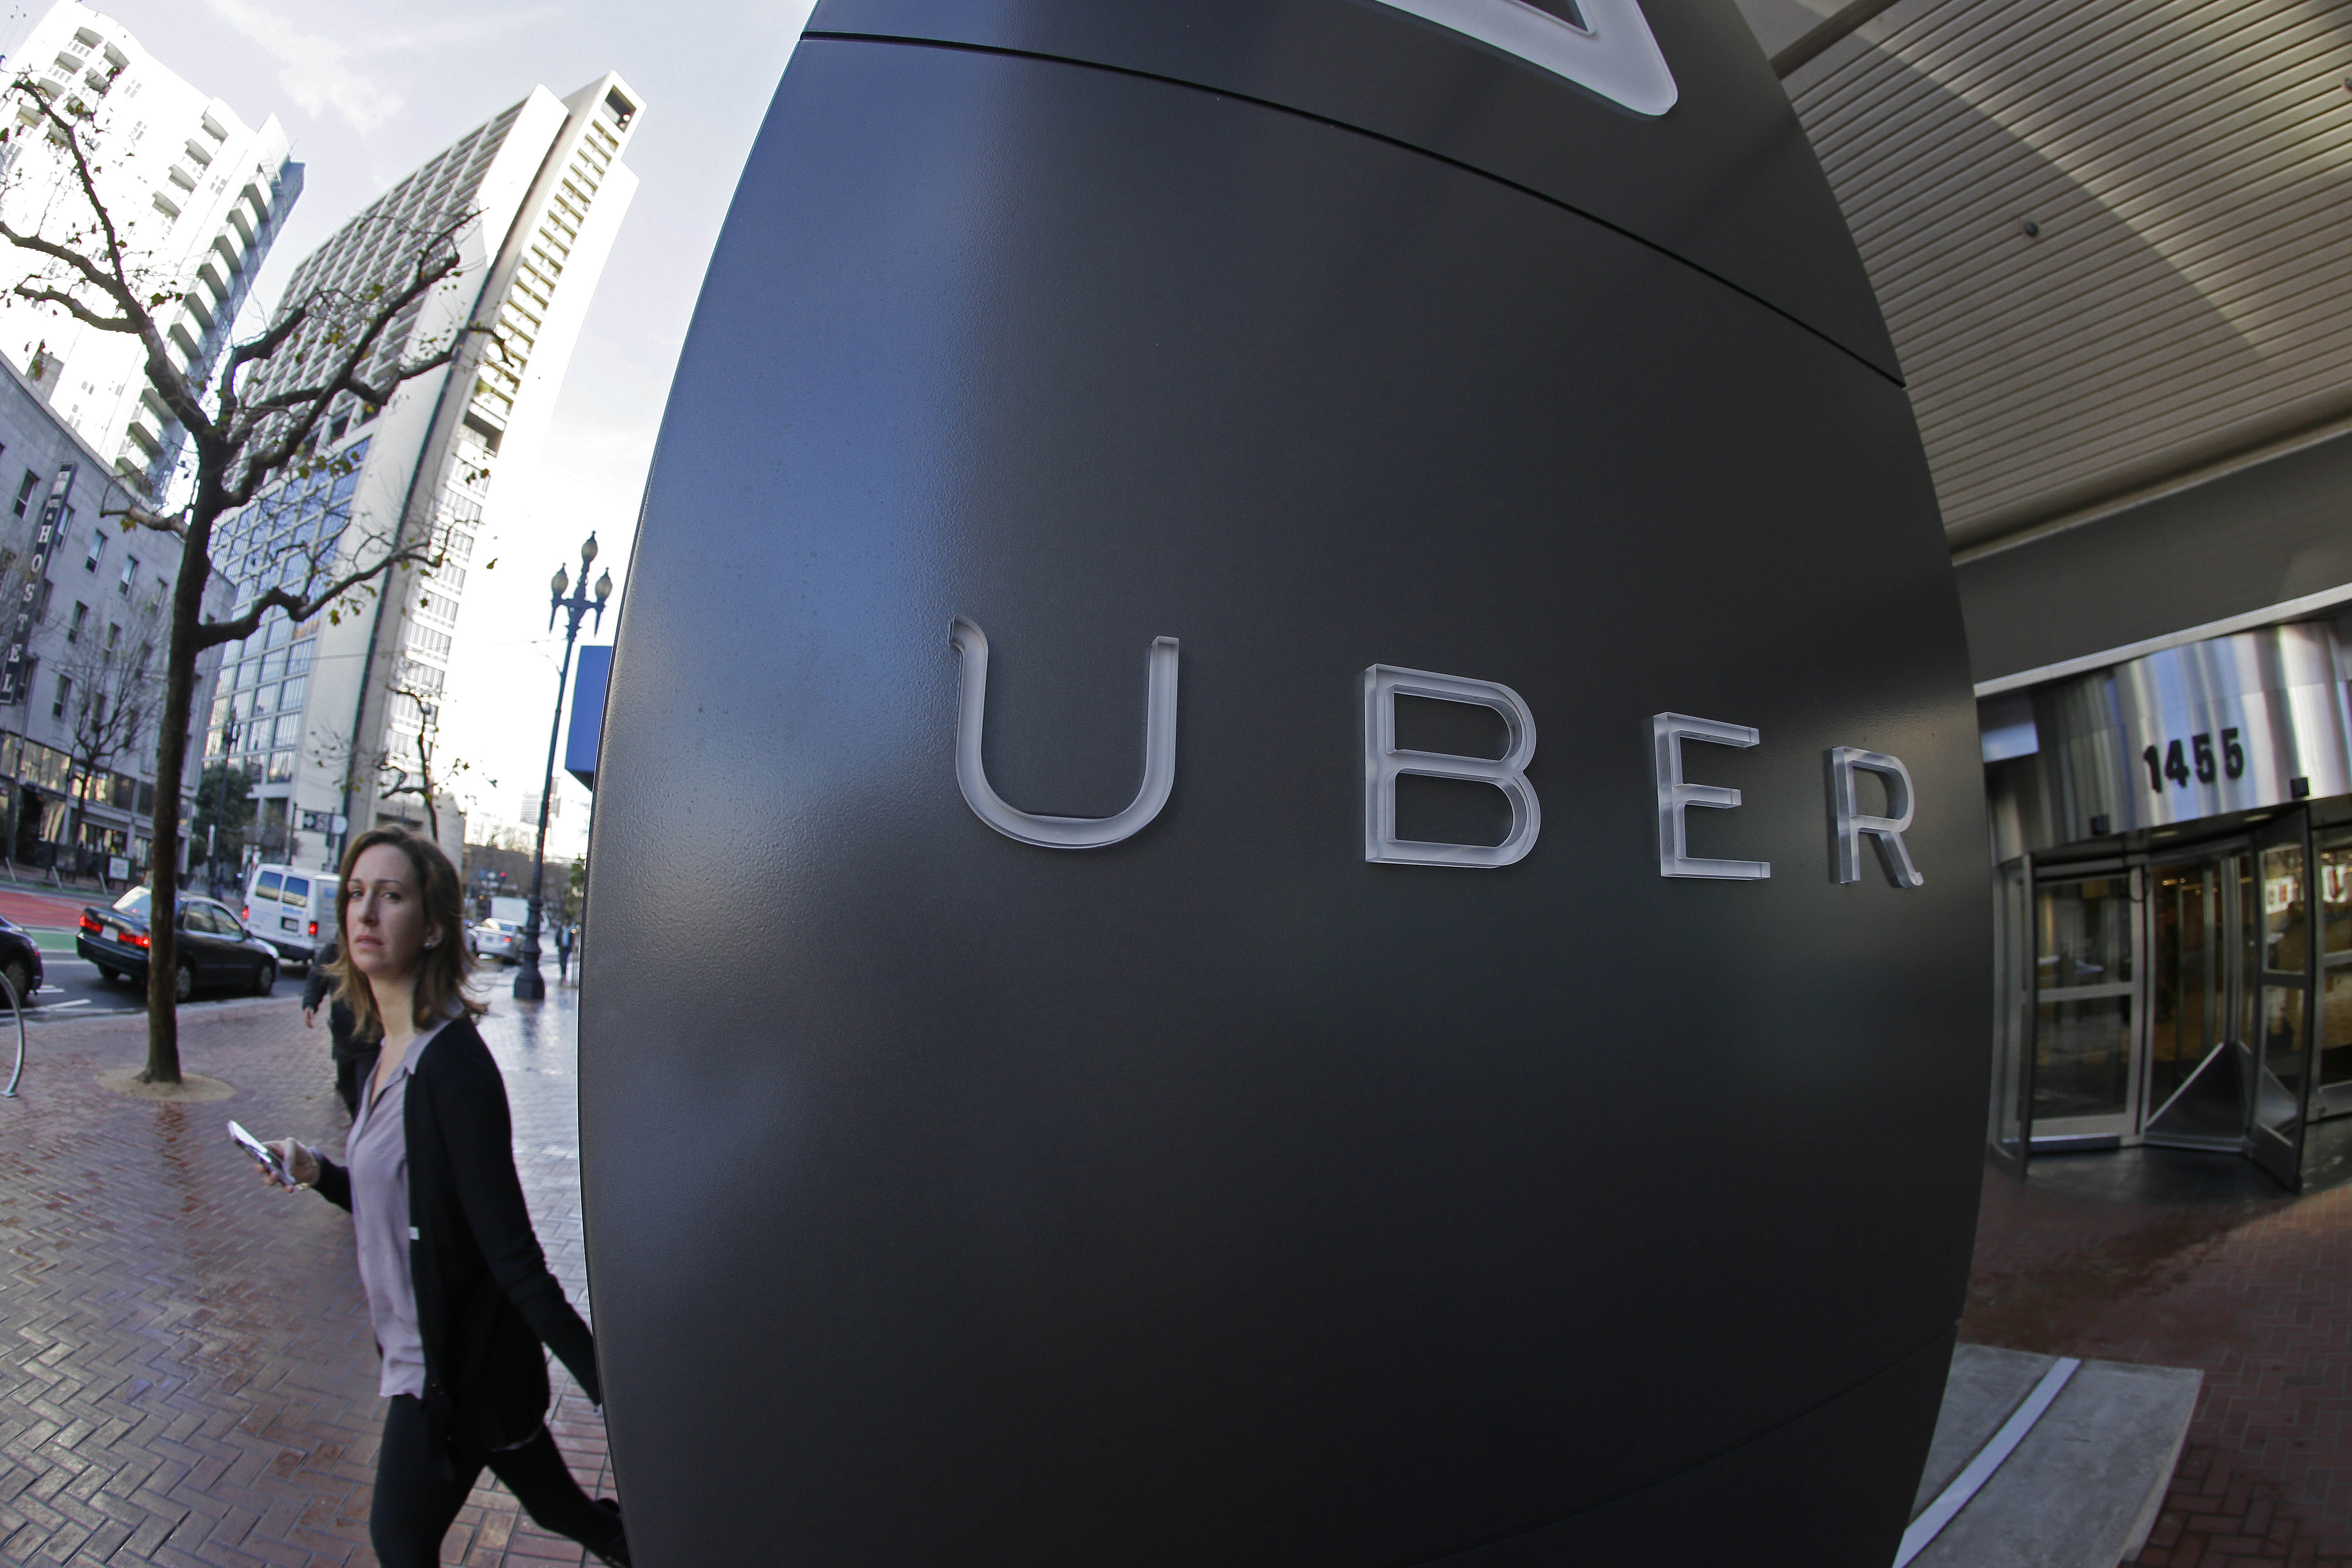 Uber's new helicopter service in China is set to attract tourists